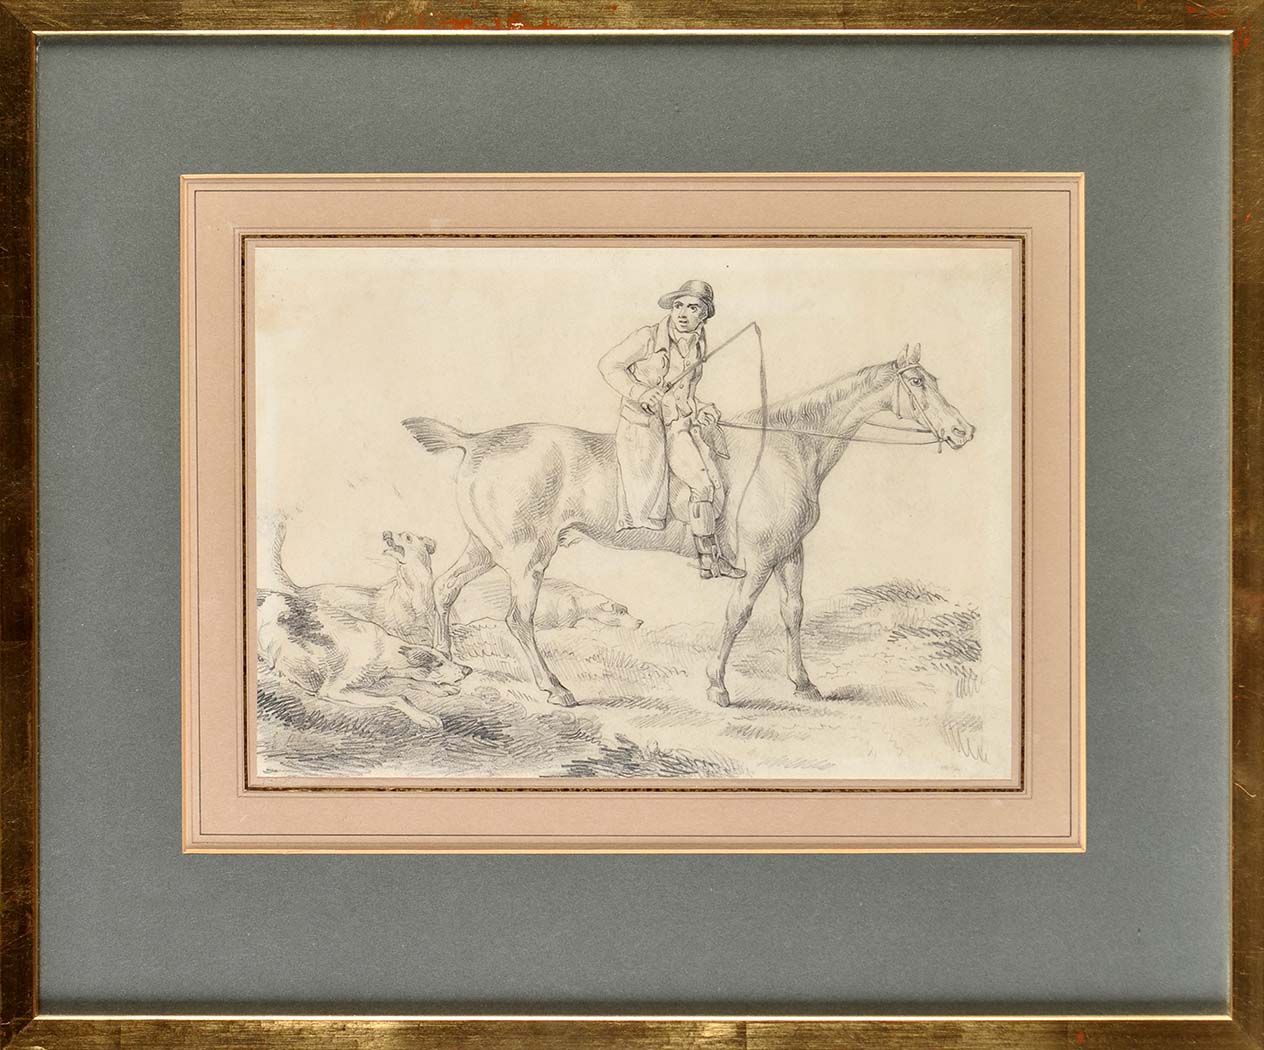 19th Century English School
A WHIPPER-IN AND TWO FOXHOUNDS
pencil
21 x 30cms; 8 1/4 x 11 3/4in.